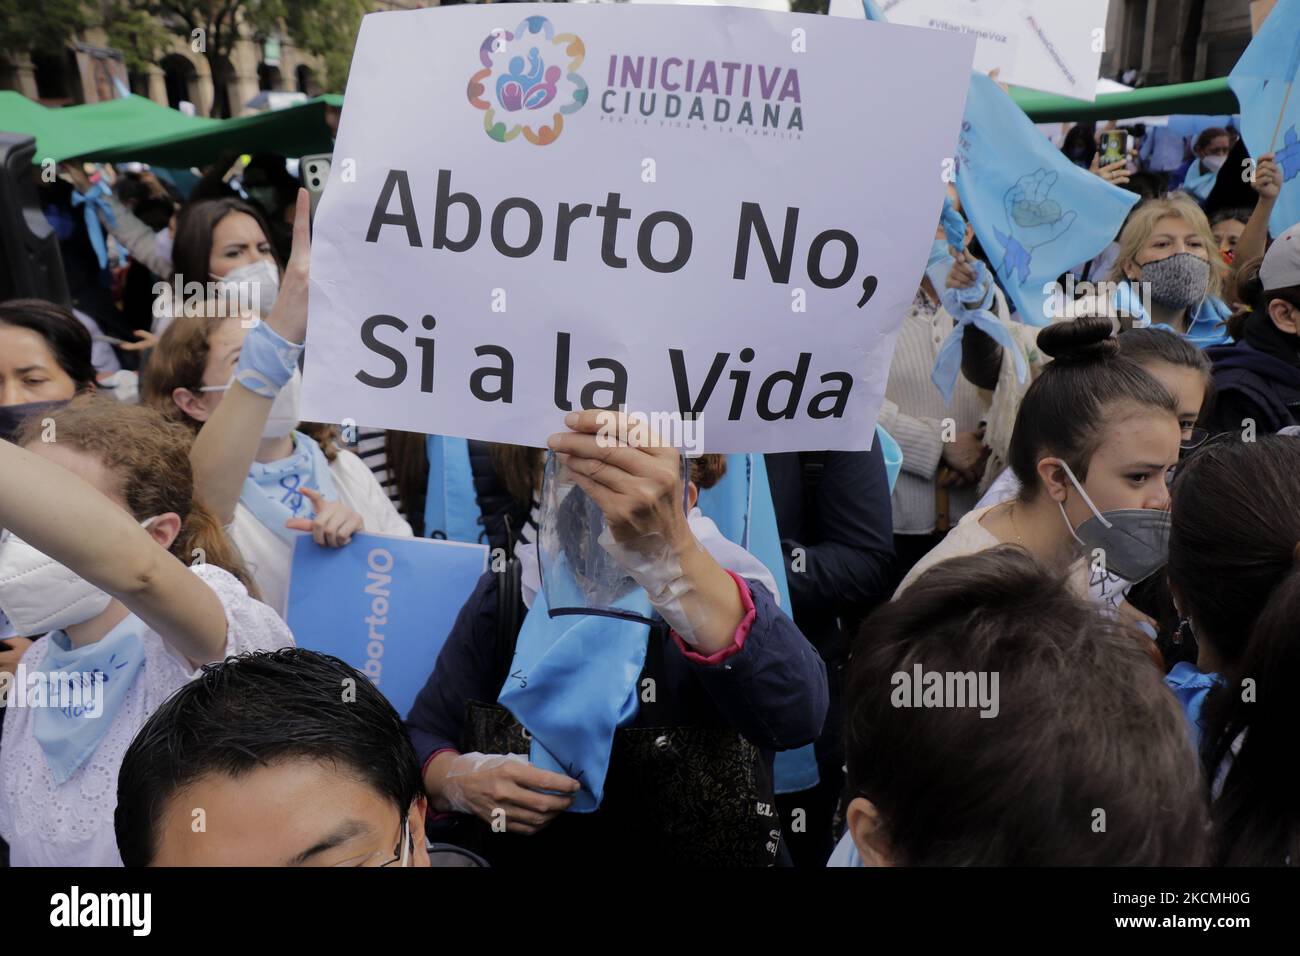 Members of the National Front for the Family and religious groups demonstrate outside the Supreme Court of Justice in Mexico City against the decriminalisation of abortion after ministers, following a historic decision, recently voted unanimously in favour in plenary during the COVID-19 health emergency. (Photo by Gerardo Vieyra/NurPhoto) Stock Photo